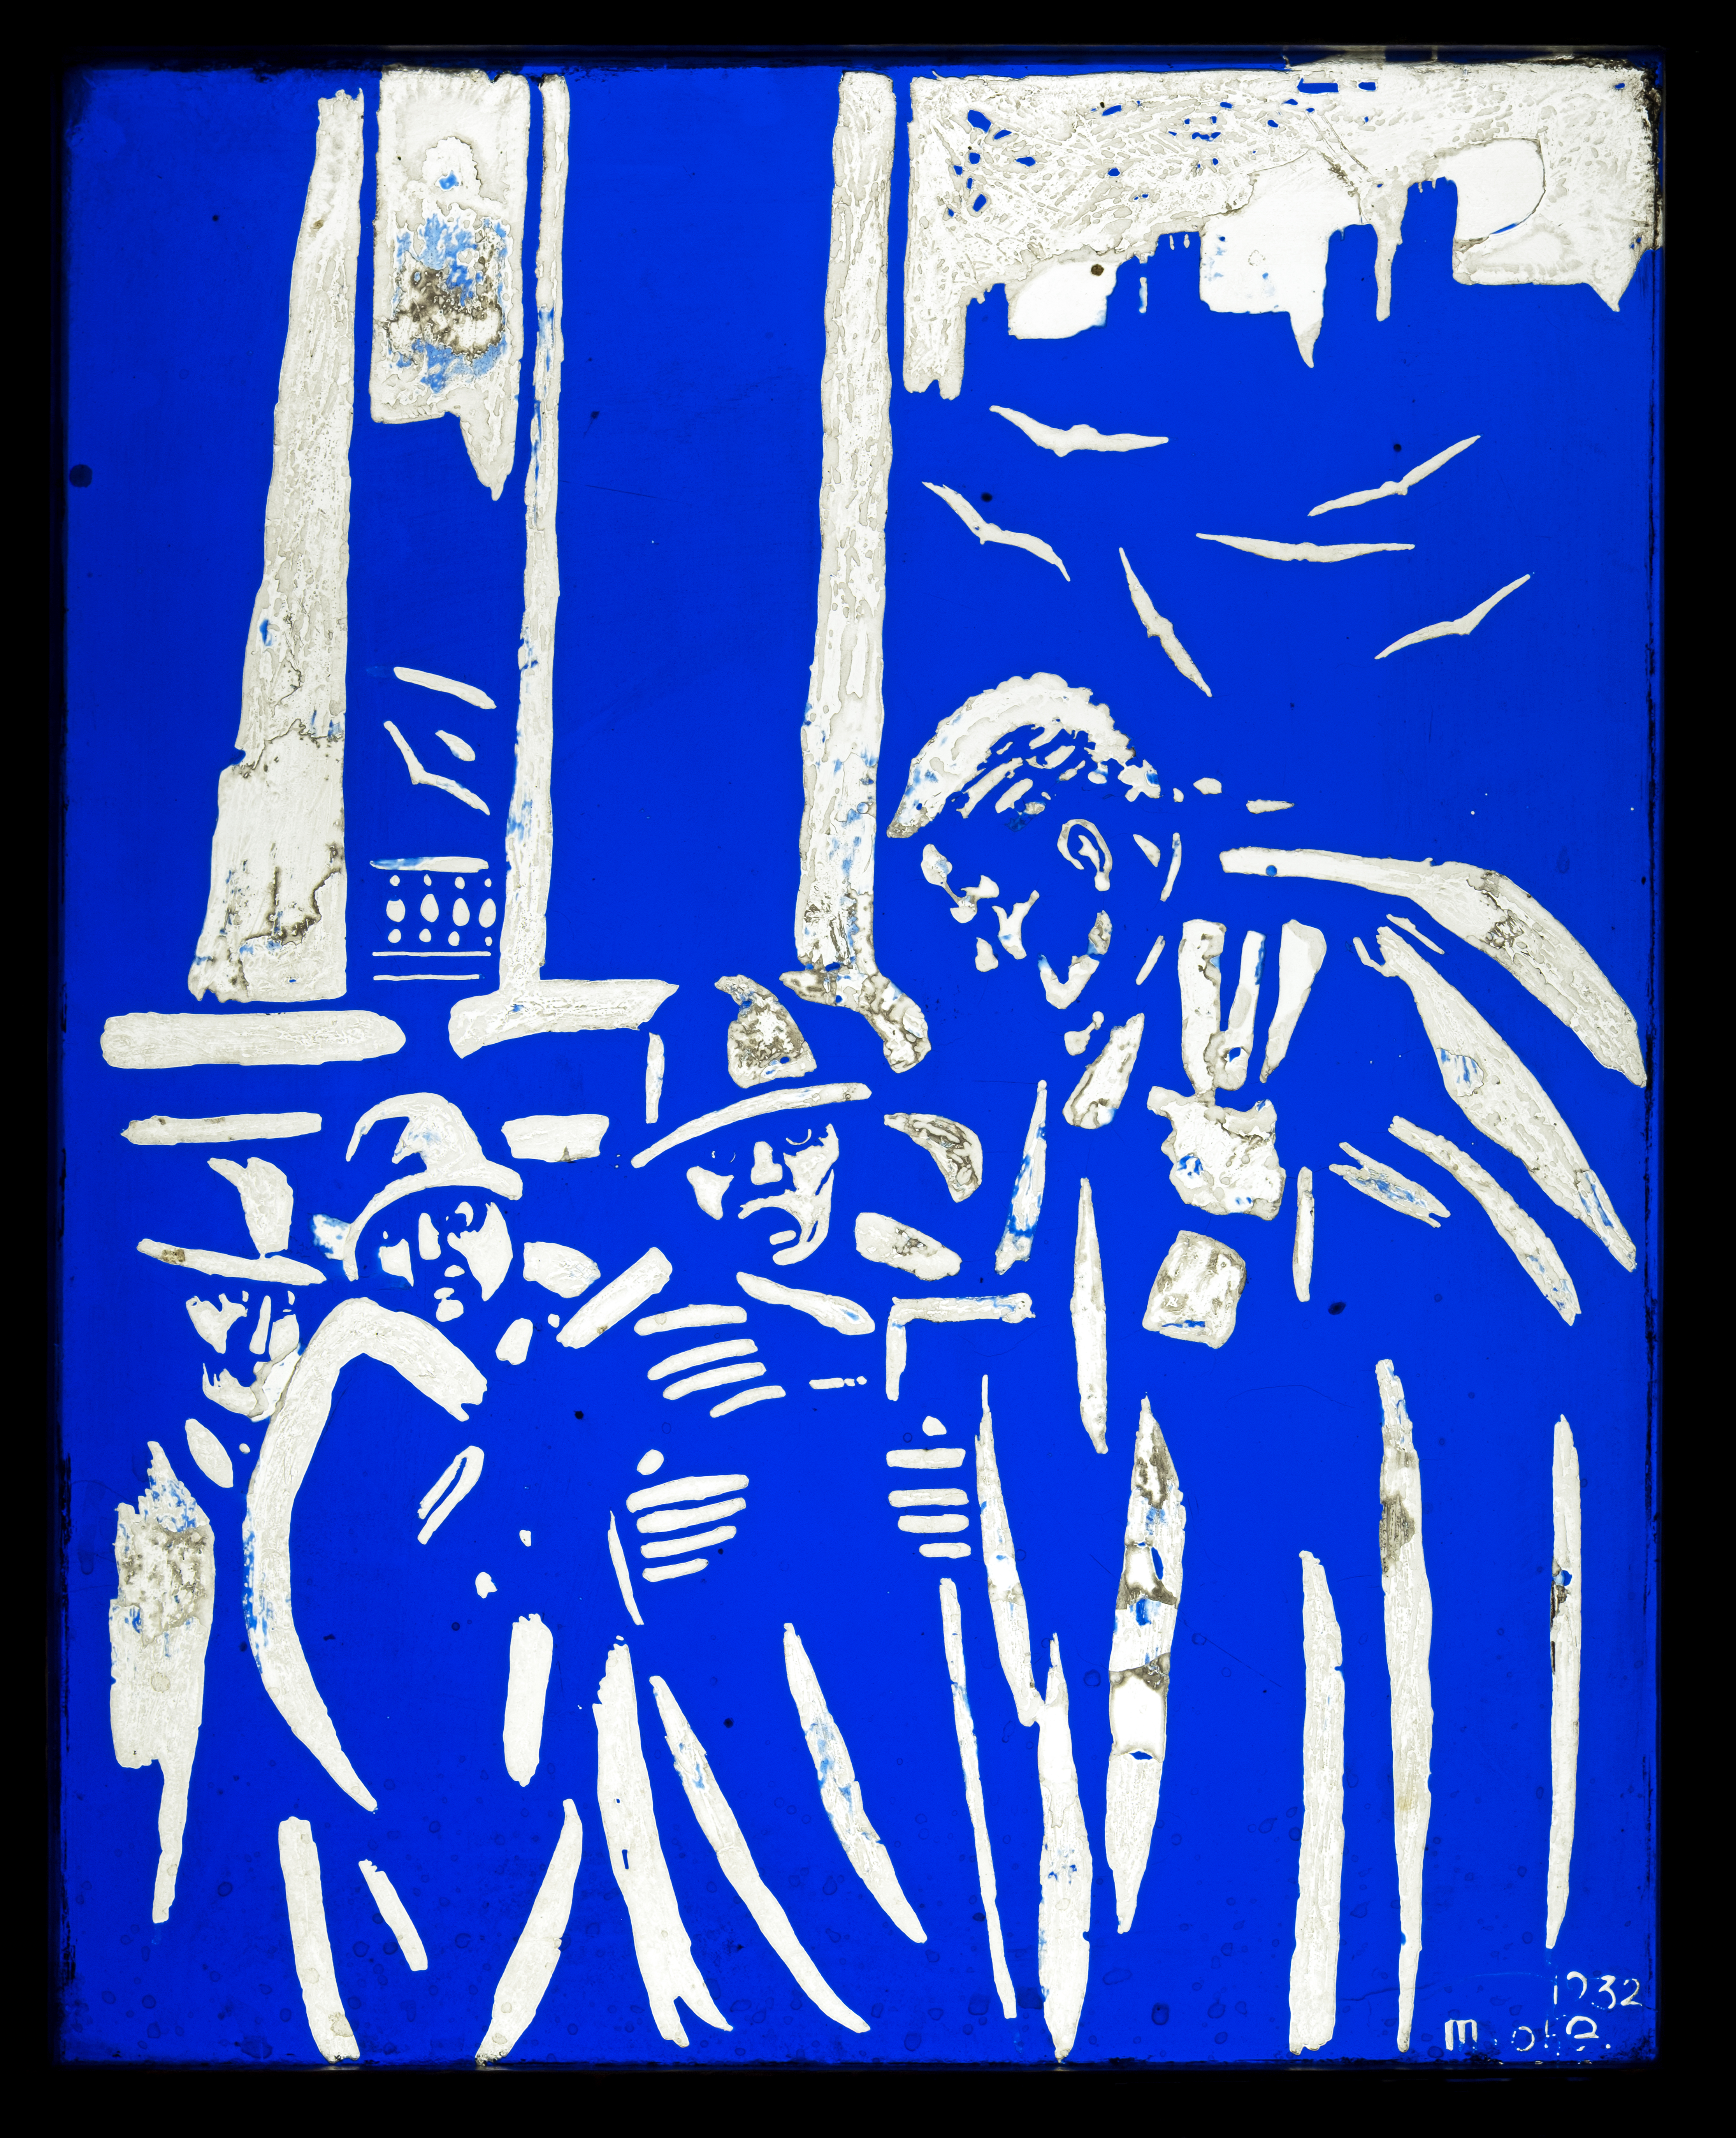 A blue acided stained glass panel, entitled 'Outside the Courts' by Micheal Healy